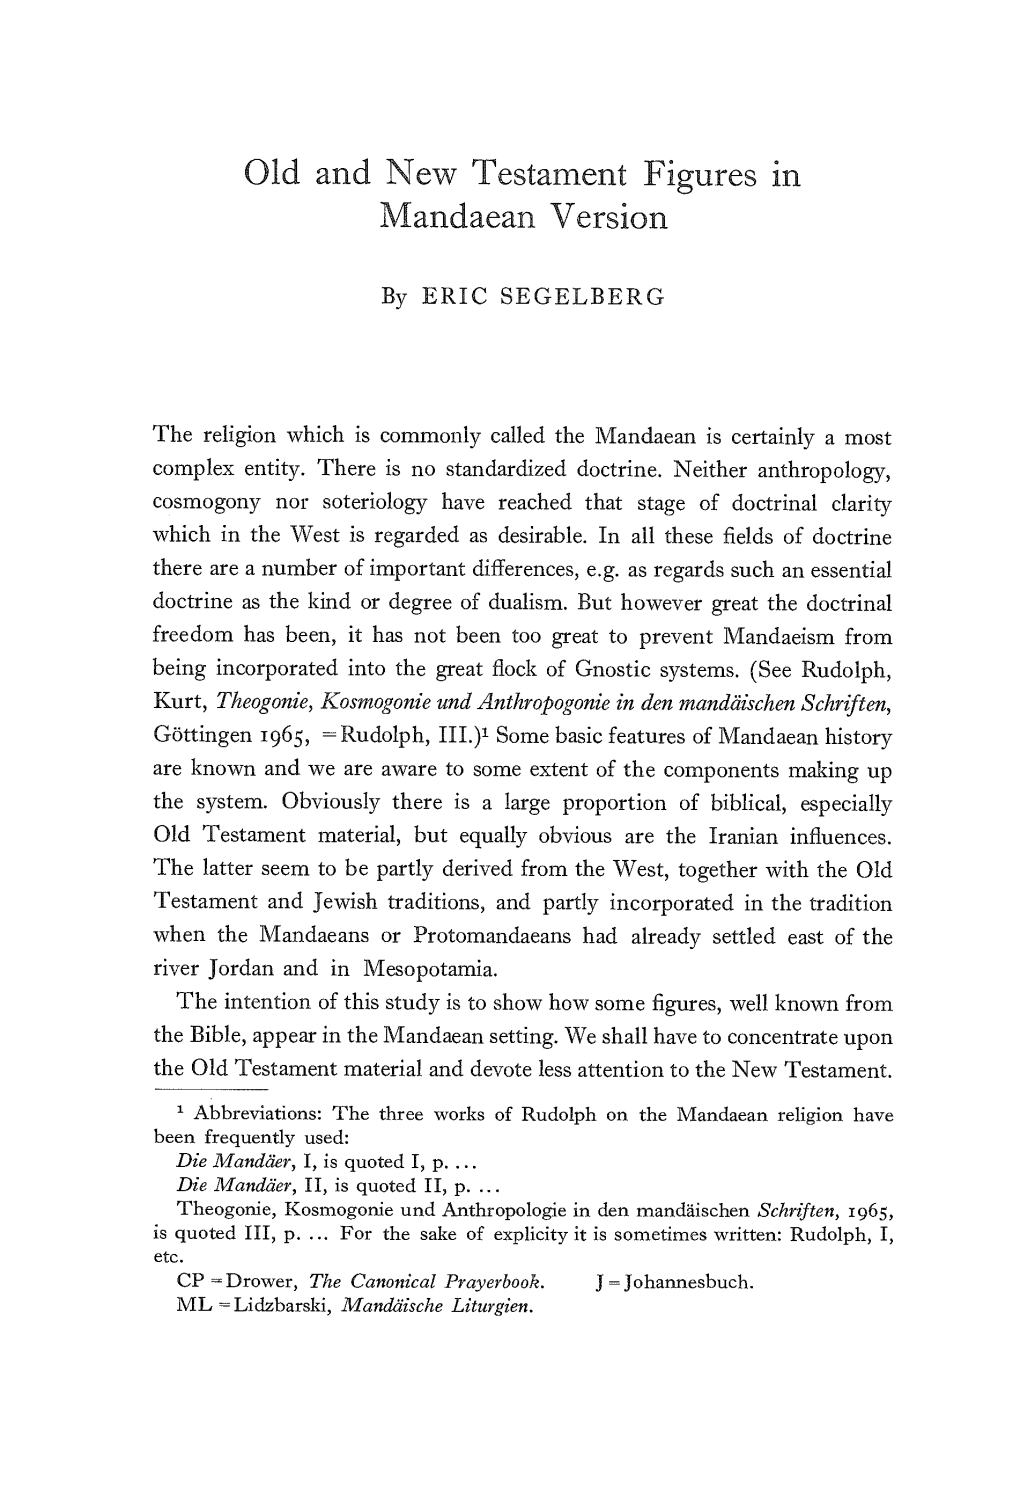 Old and New Testament Figures in Mandaean Version